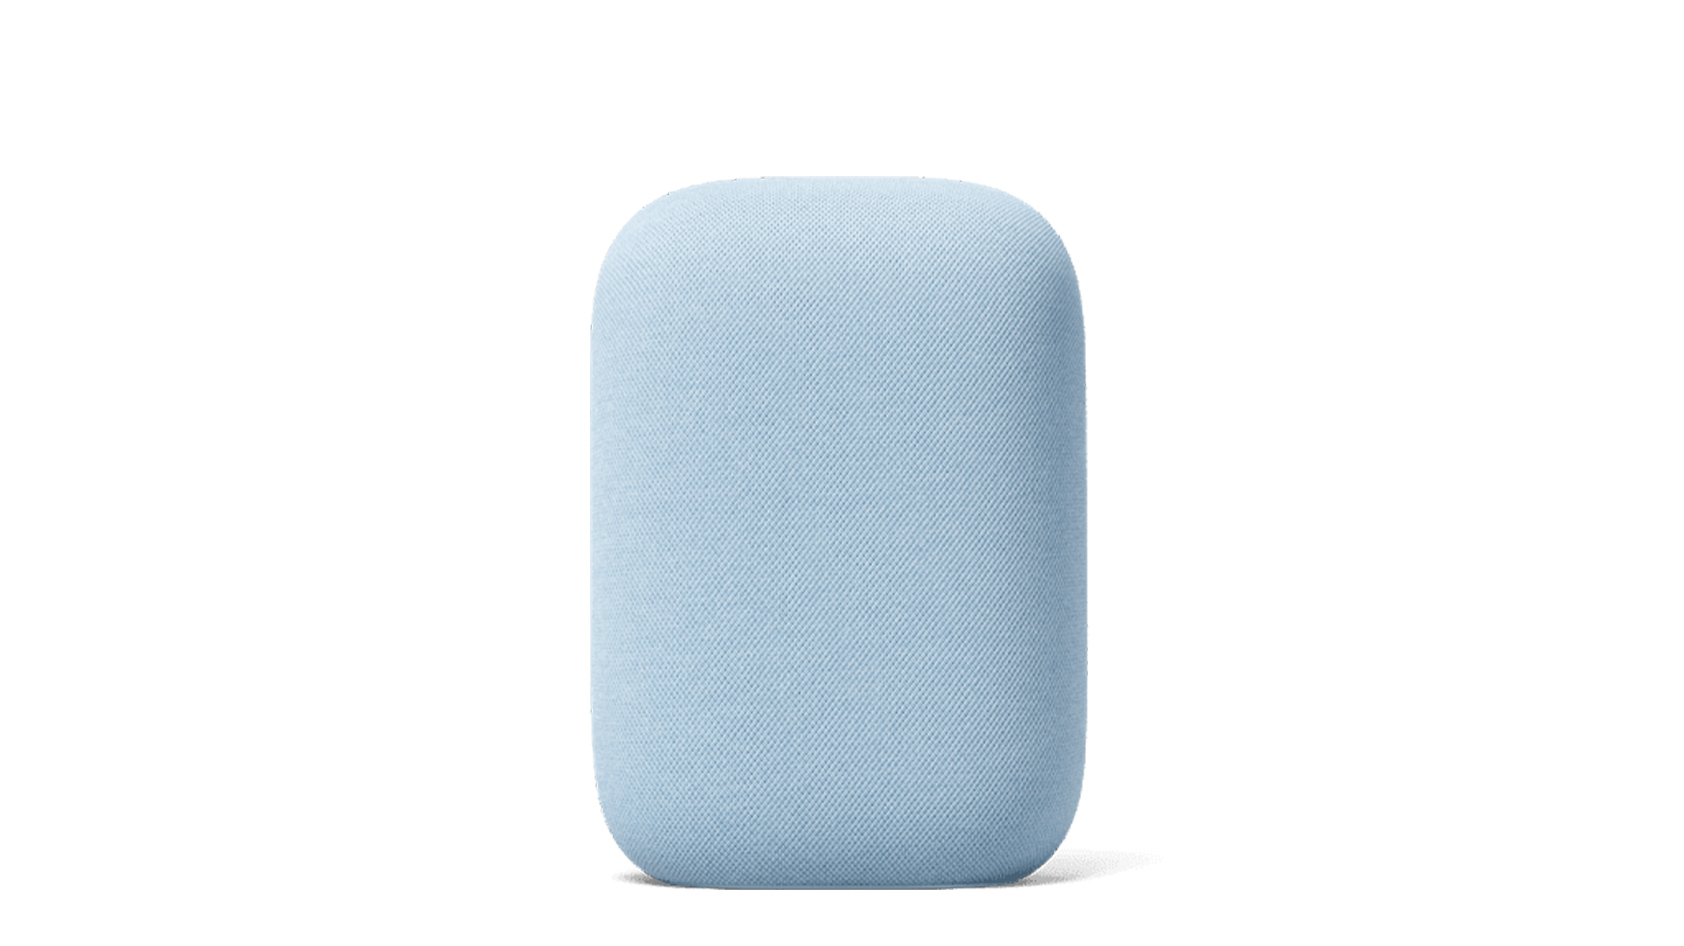 The Google Nest Audio in blue against a white background.